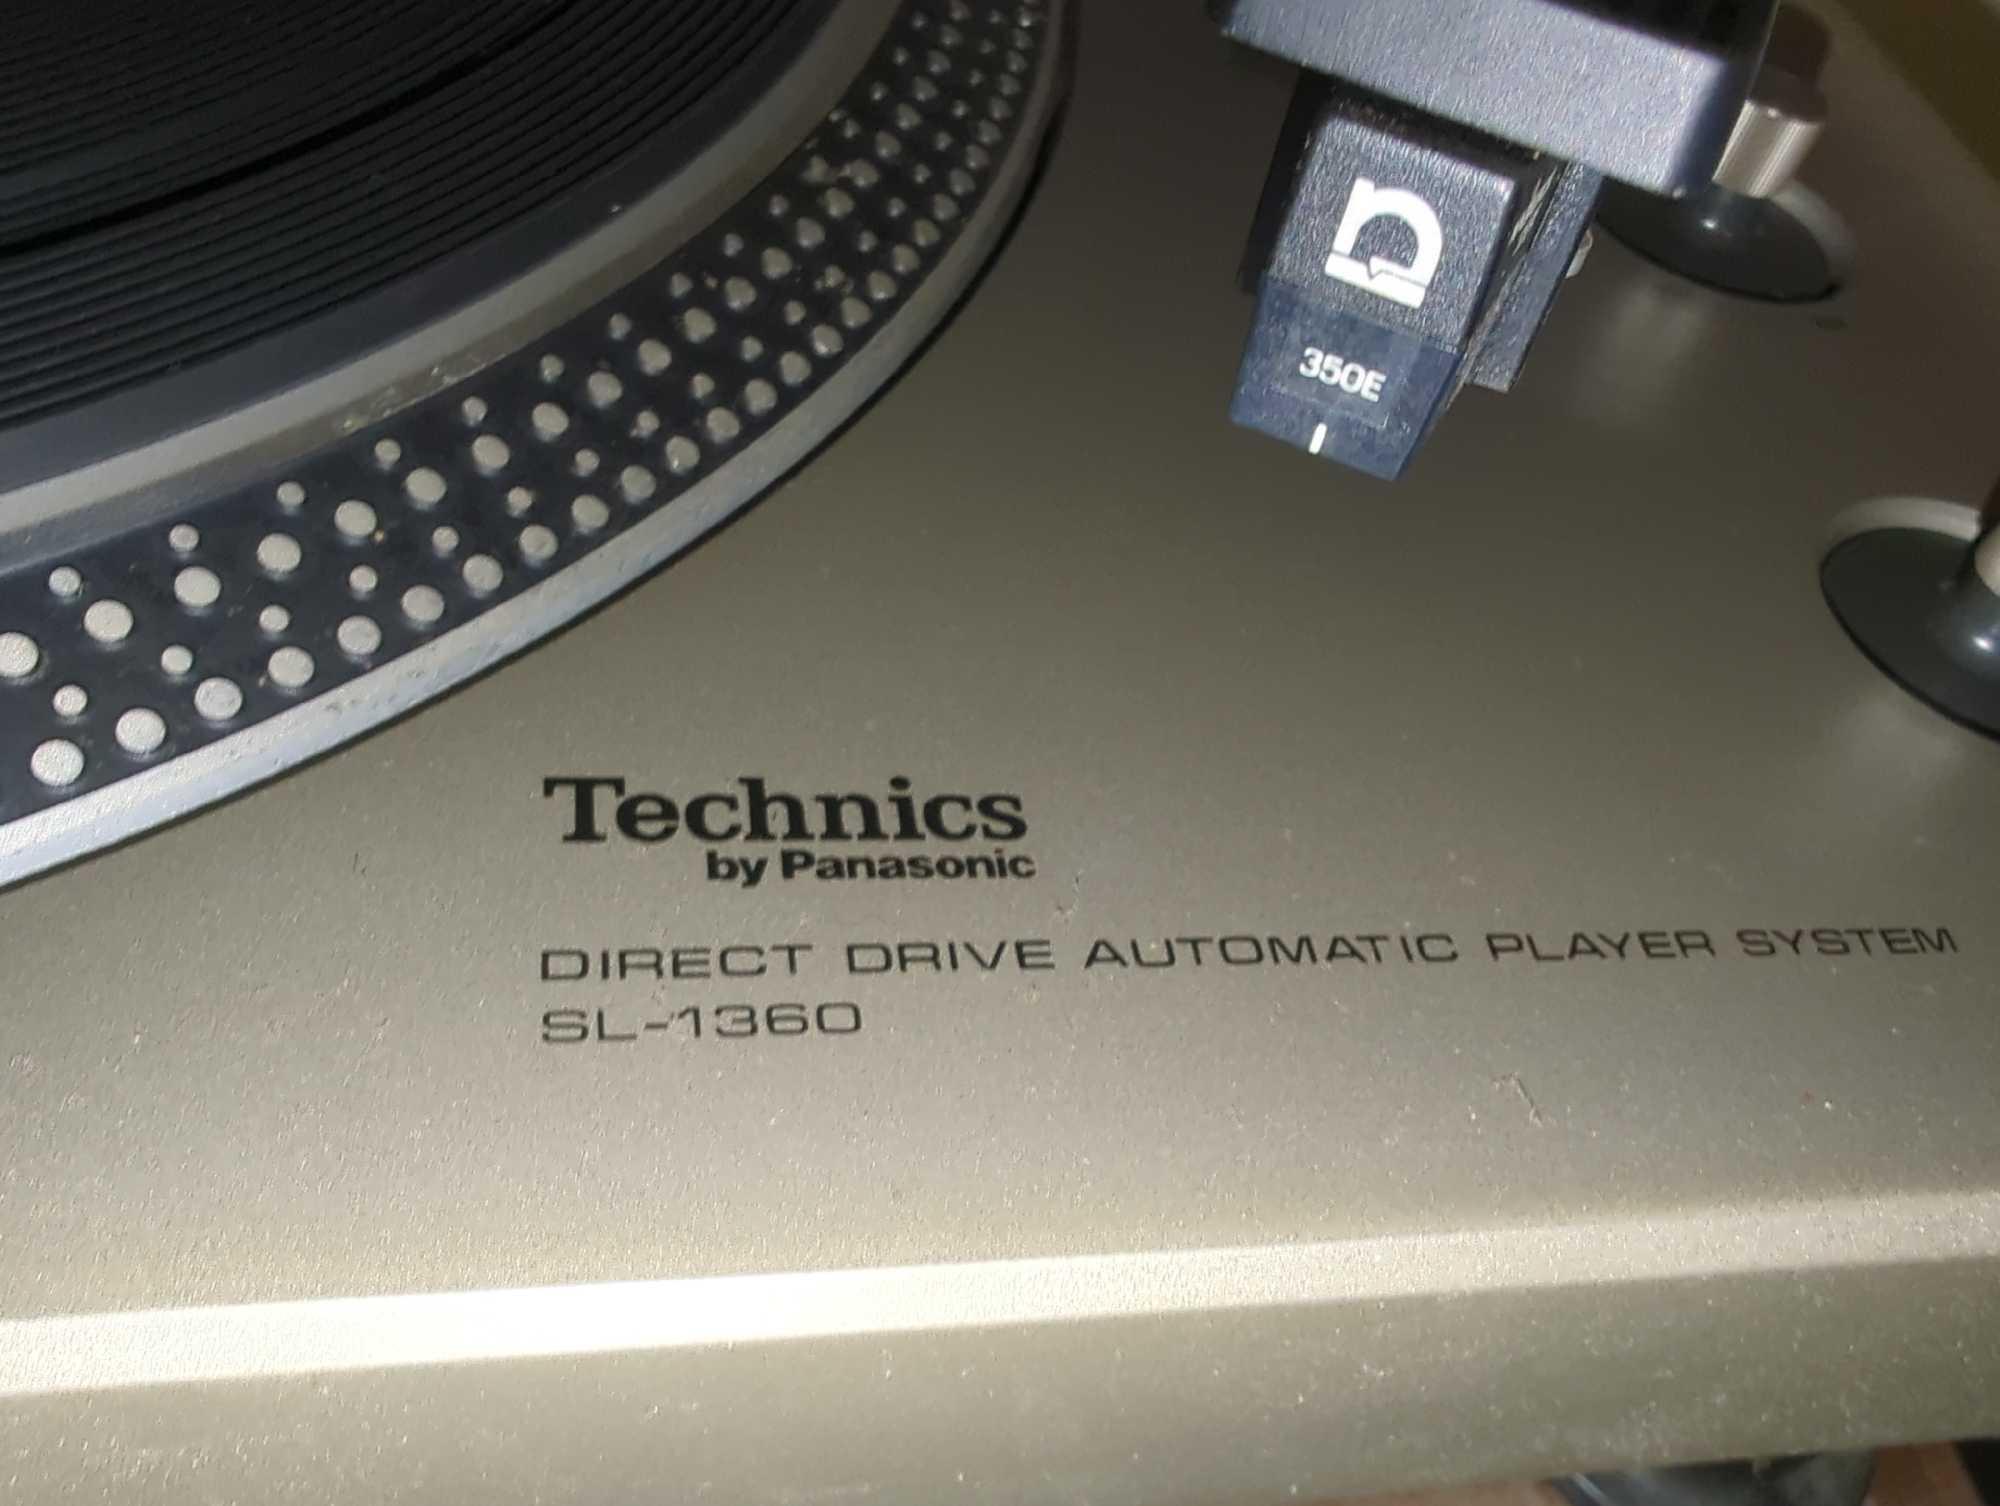 (BR3) TECHNICS BY PANASONIC DIRECT (DR)IVE AUTOMATIC PLAYER SYSTEM, MODEL SL-1360, RETAIL PRICE